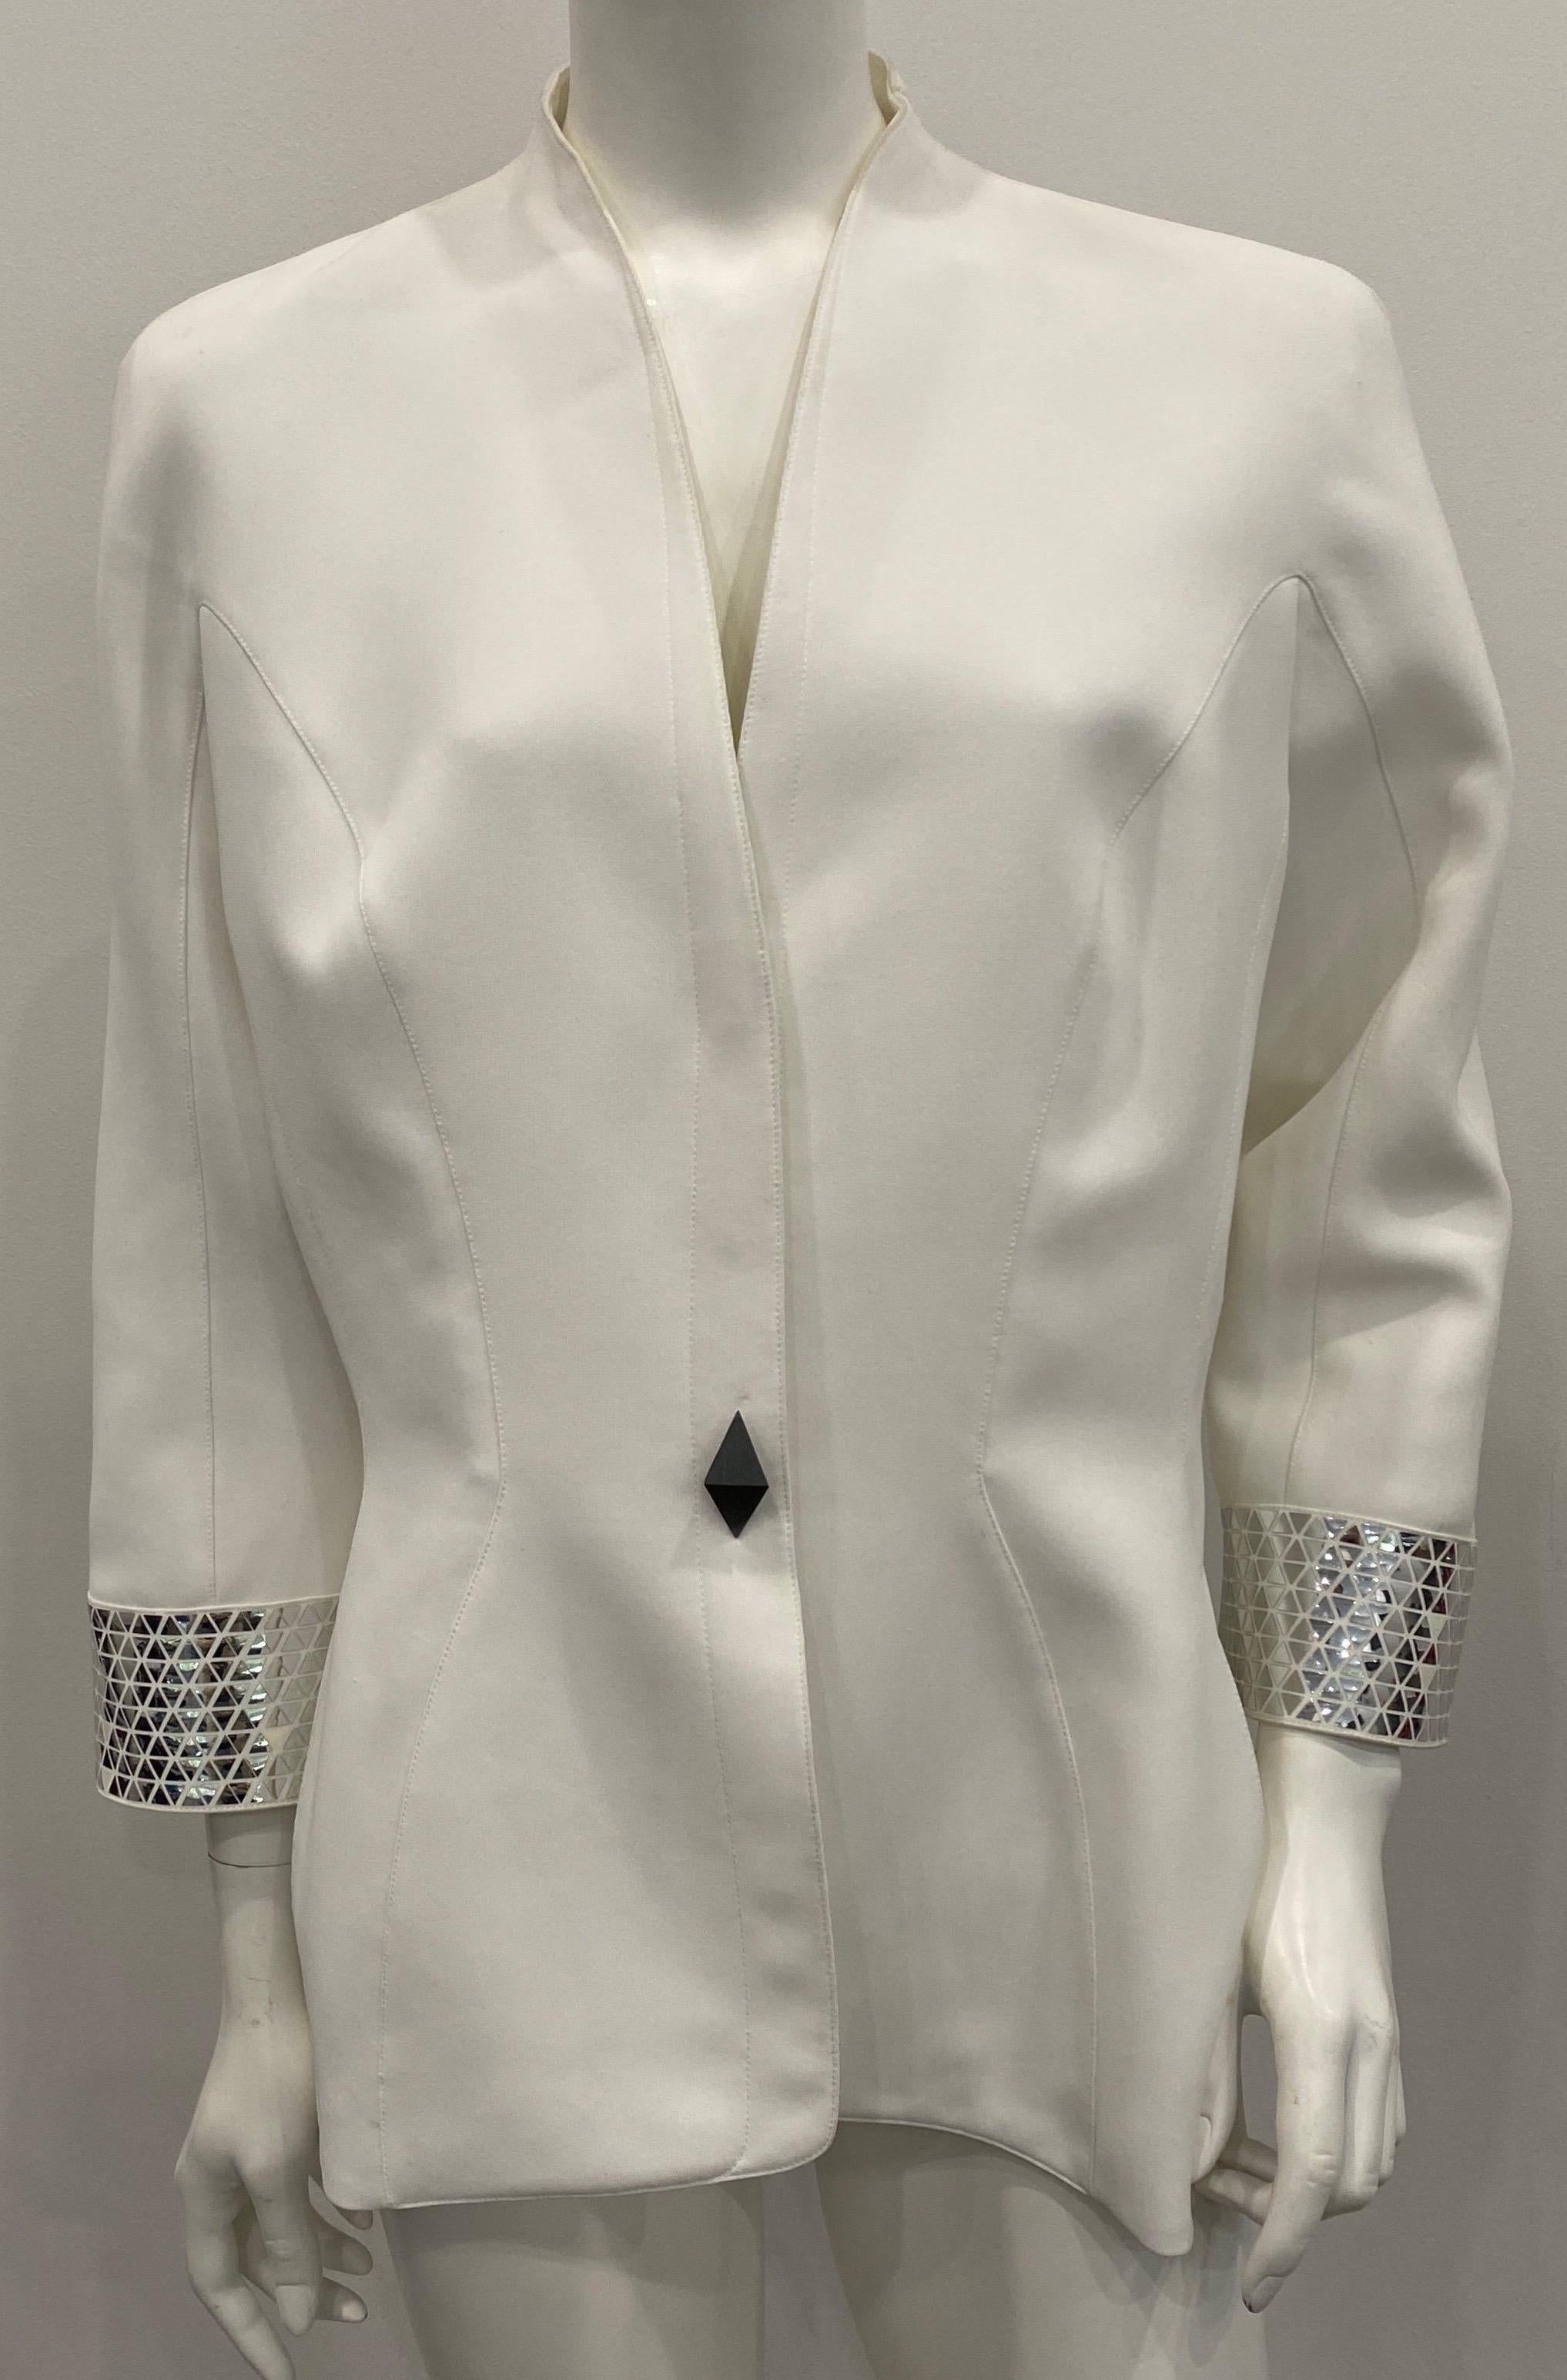 Thierry Mugler Couture 1990s White Polyester Jacket with Silver metallic details - Size 46  This fantastic fully lined vintage Mugler Couture piece is single breasted, with a decorative silver button and 3 interior snaps. It has no shoulder line,